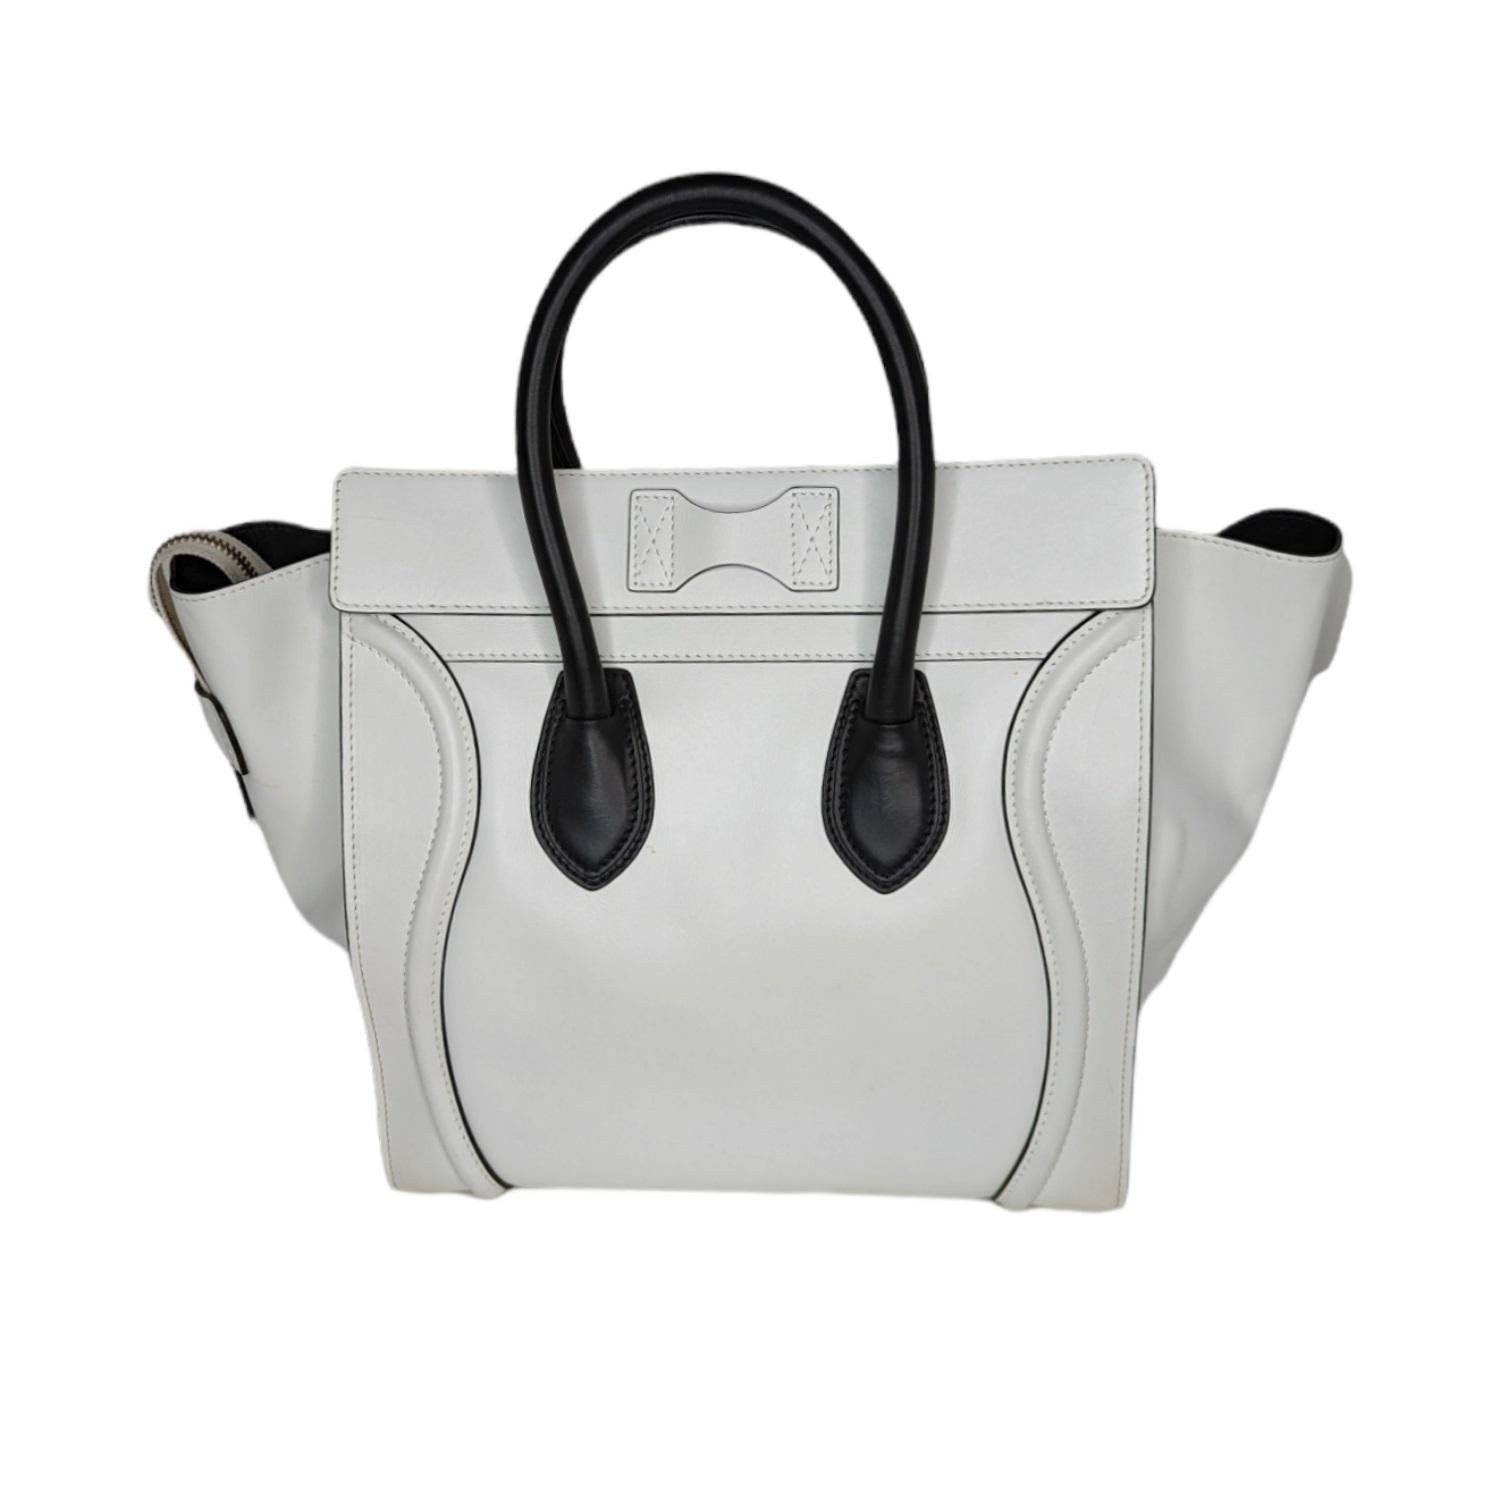 This stylish tote bag is crafted of rich white calfskin leather. The bag features rolled black leather top handles, and the iconic Celine leather scroll trim in white on the front. The overextended top zipper opens the bag to a smooth black leather